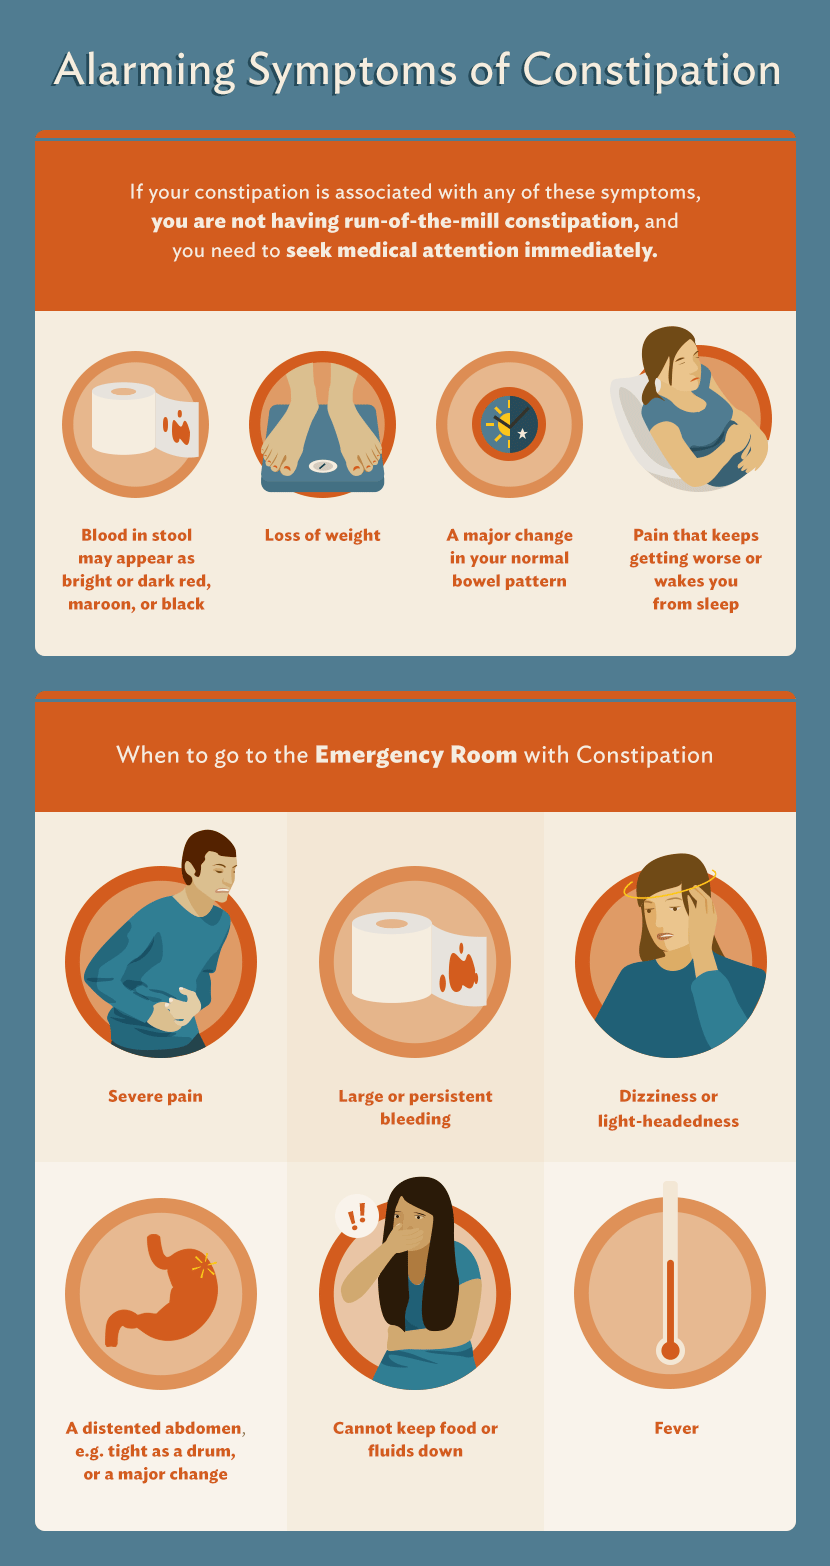 How To Help With Constipation